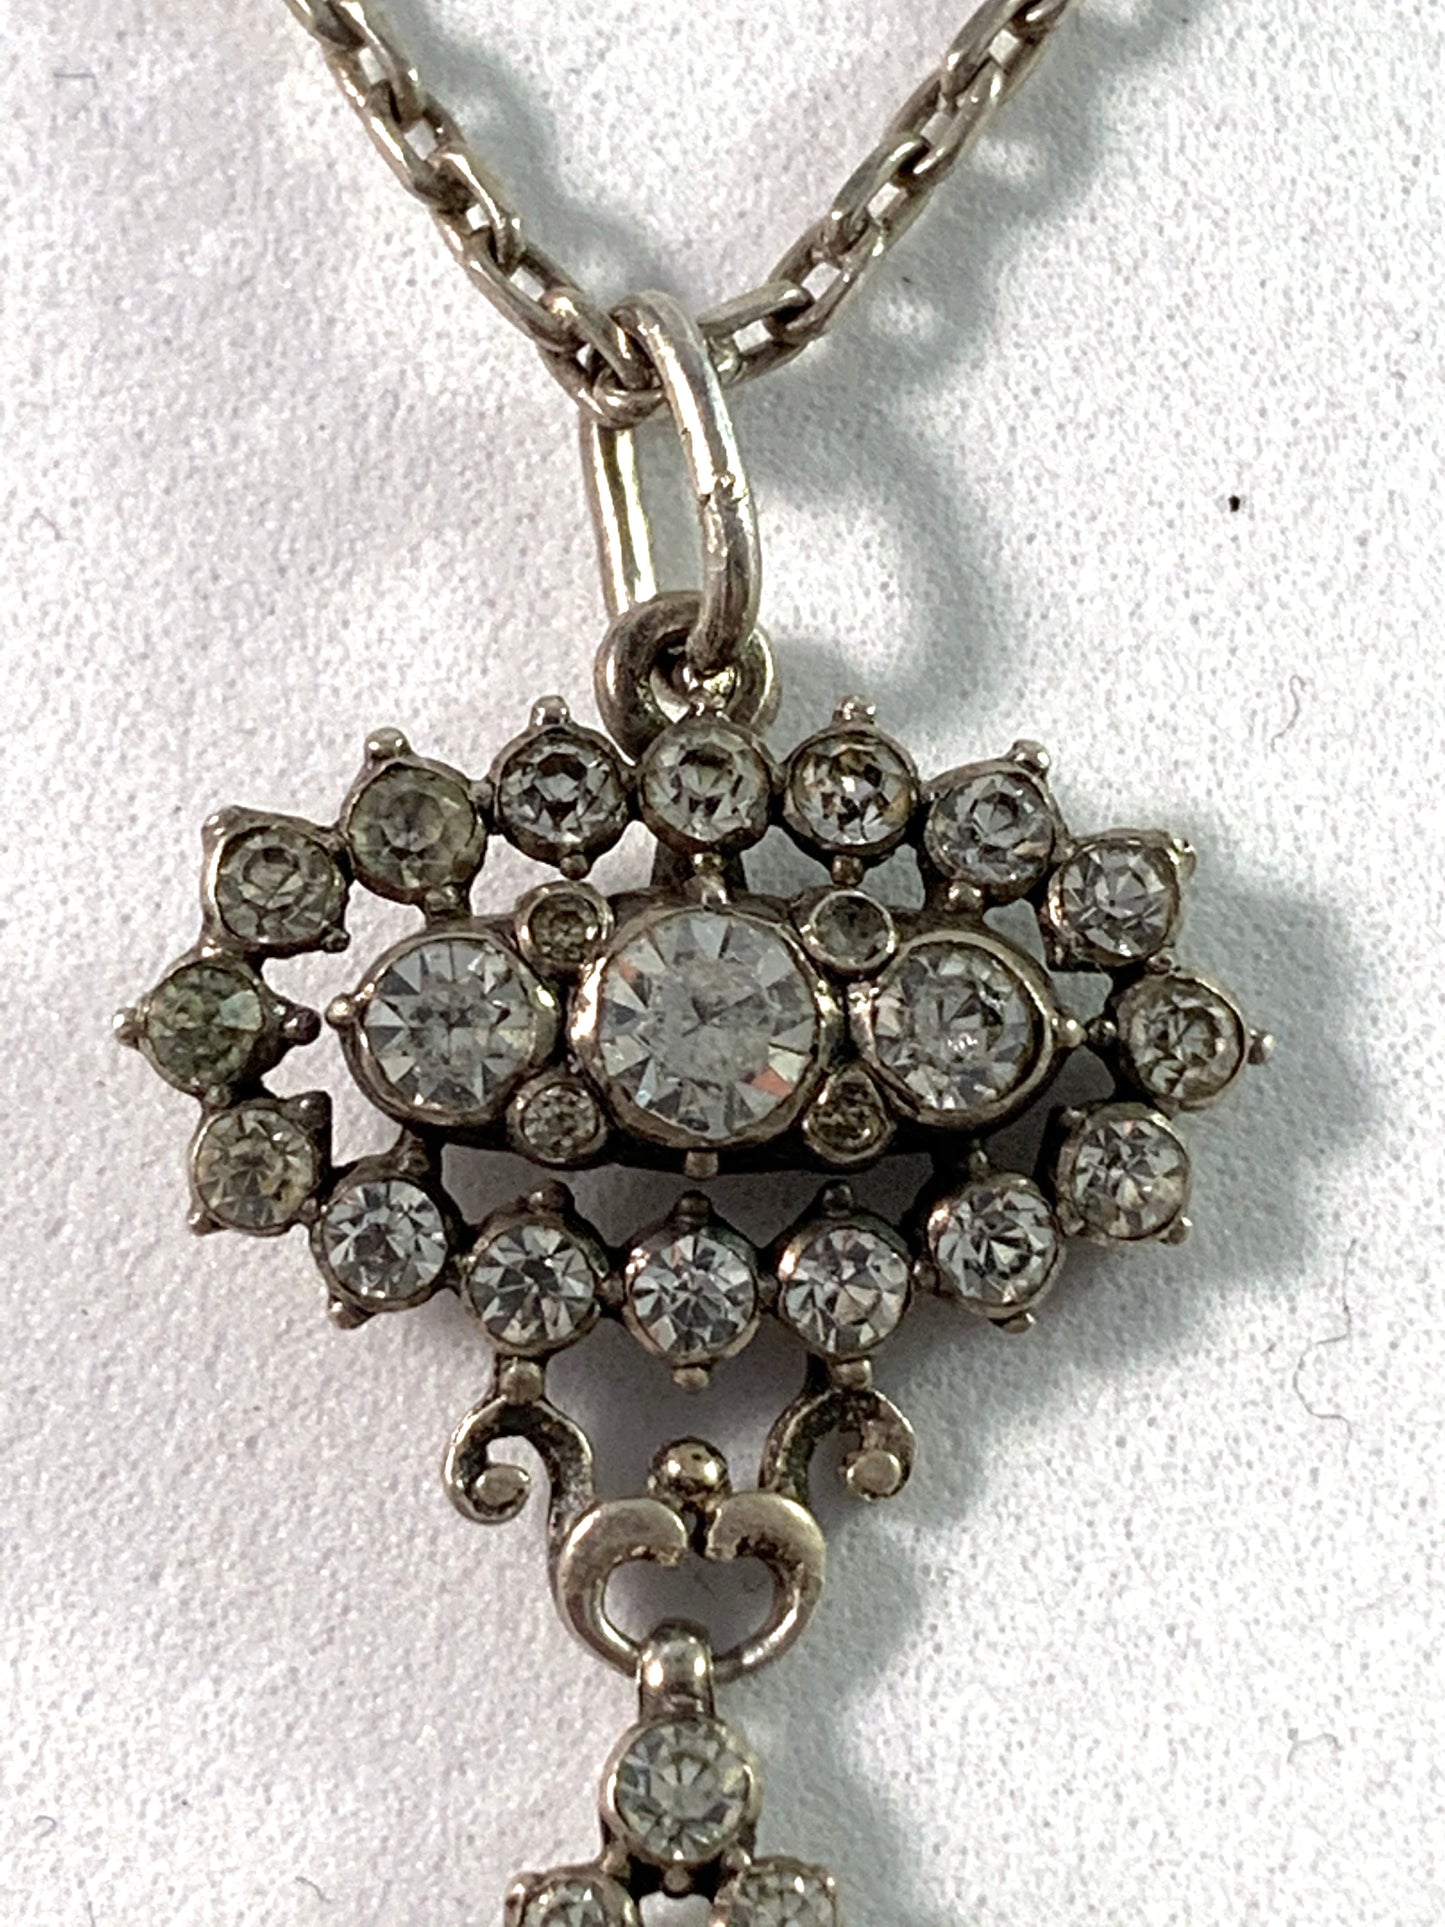 Knoll & Pregizer, Germany 1920s Solid Silver Paste Necklace.